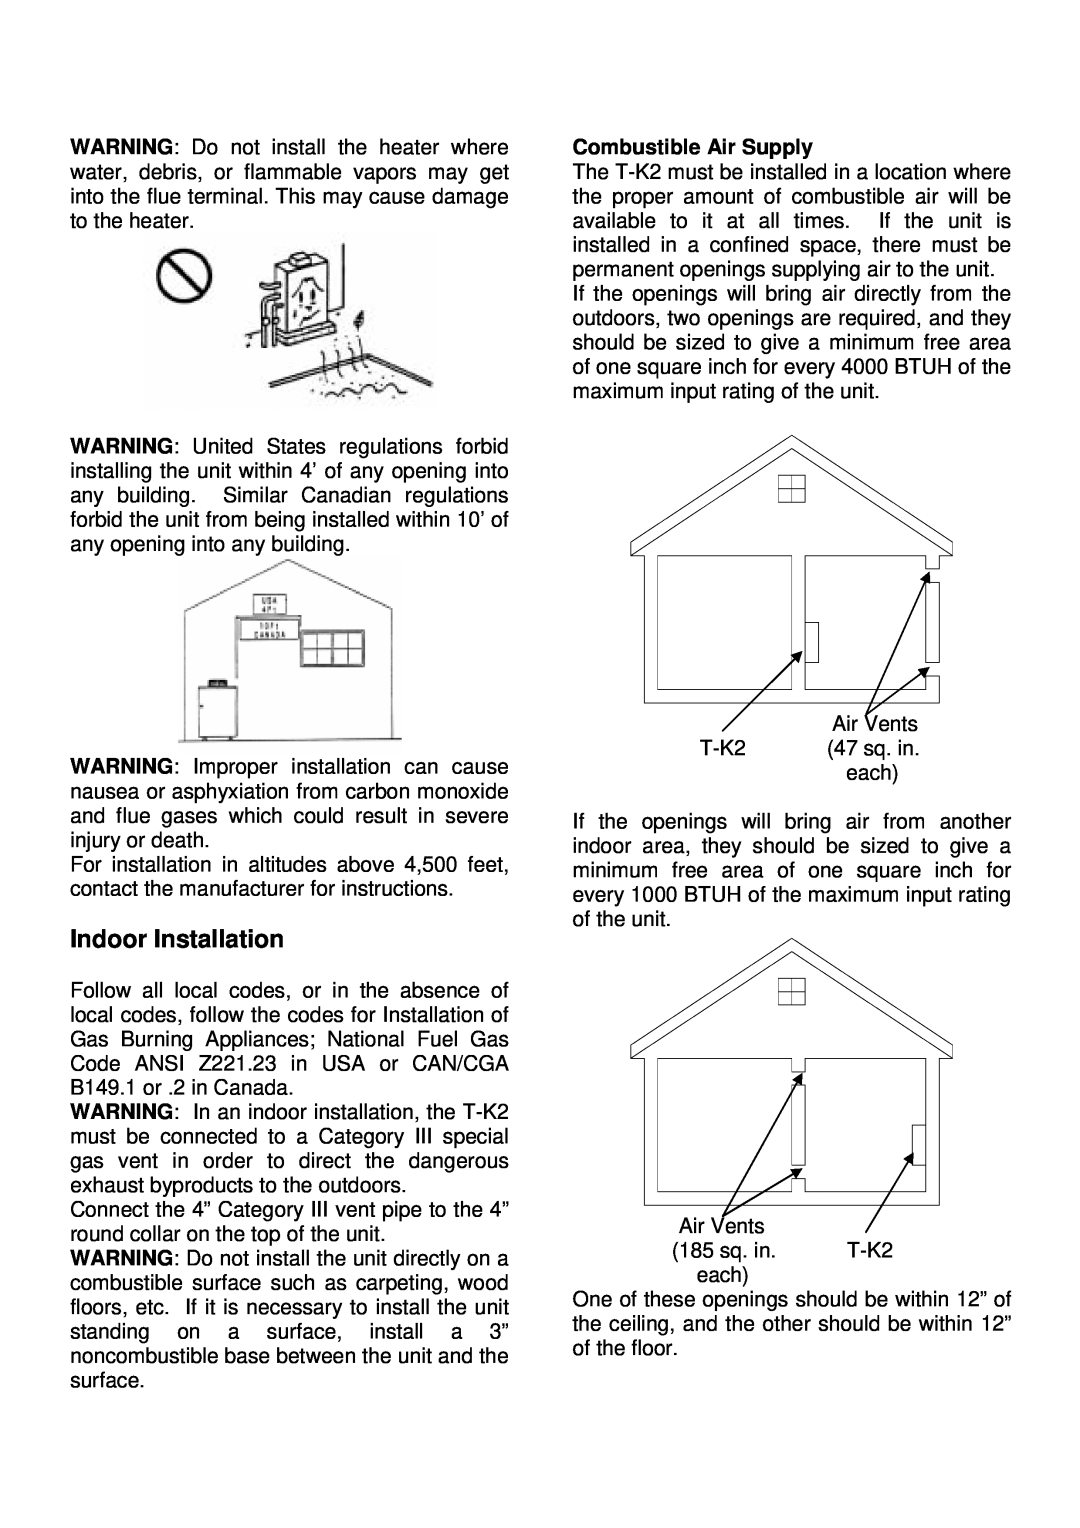 Whirlpool T-K2 installation manual Indoor Installation, Combustible Air Supply 